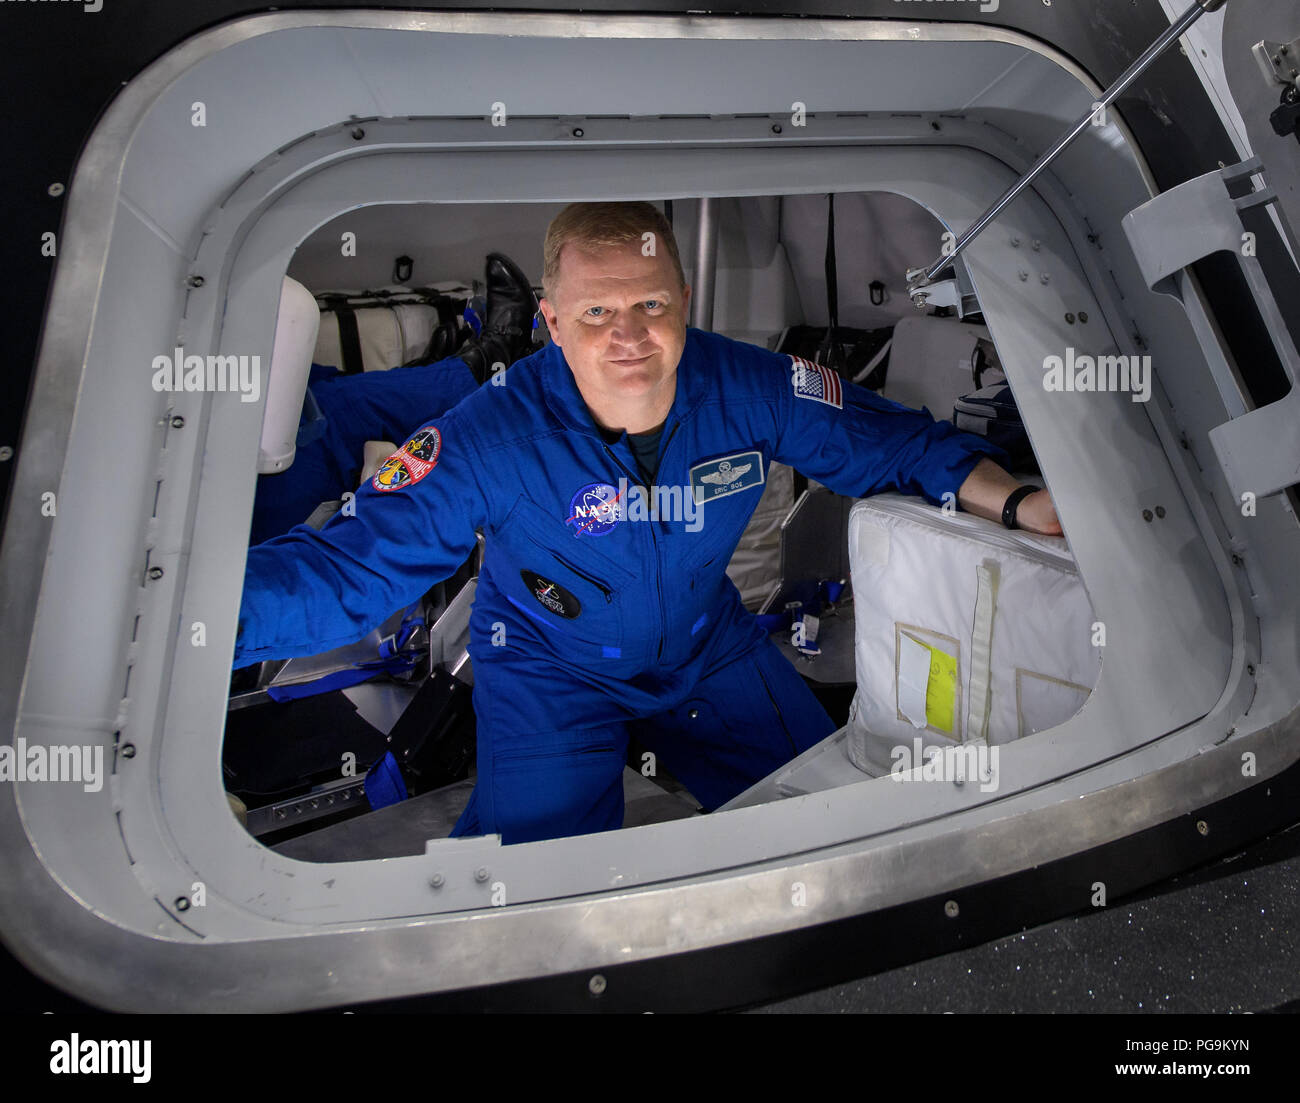 NASA astronaut Eric Boe poses for a photograph as he exits the Boeing Mockup Trainer at NASA’s Johnson Space Center in Houston, Texas on Aug. 2, 2018 ahead of the commercial crew flight assignments announcement Aug. 3. Boe, along with NASA astronaut Nicole Aunapu Mann and Boeing astronaut Chris Ferguson were assigned to launch aboard Boeing’s CST-100 Starliner on the company’s Crew Flight Test targeted for mid-2019 in partnership with NASA’s Commercial Crew Program. Stock Photo